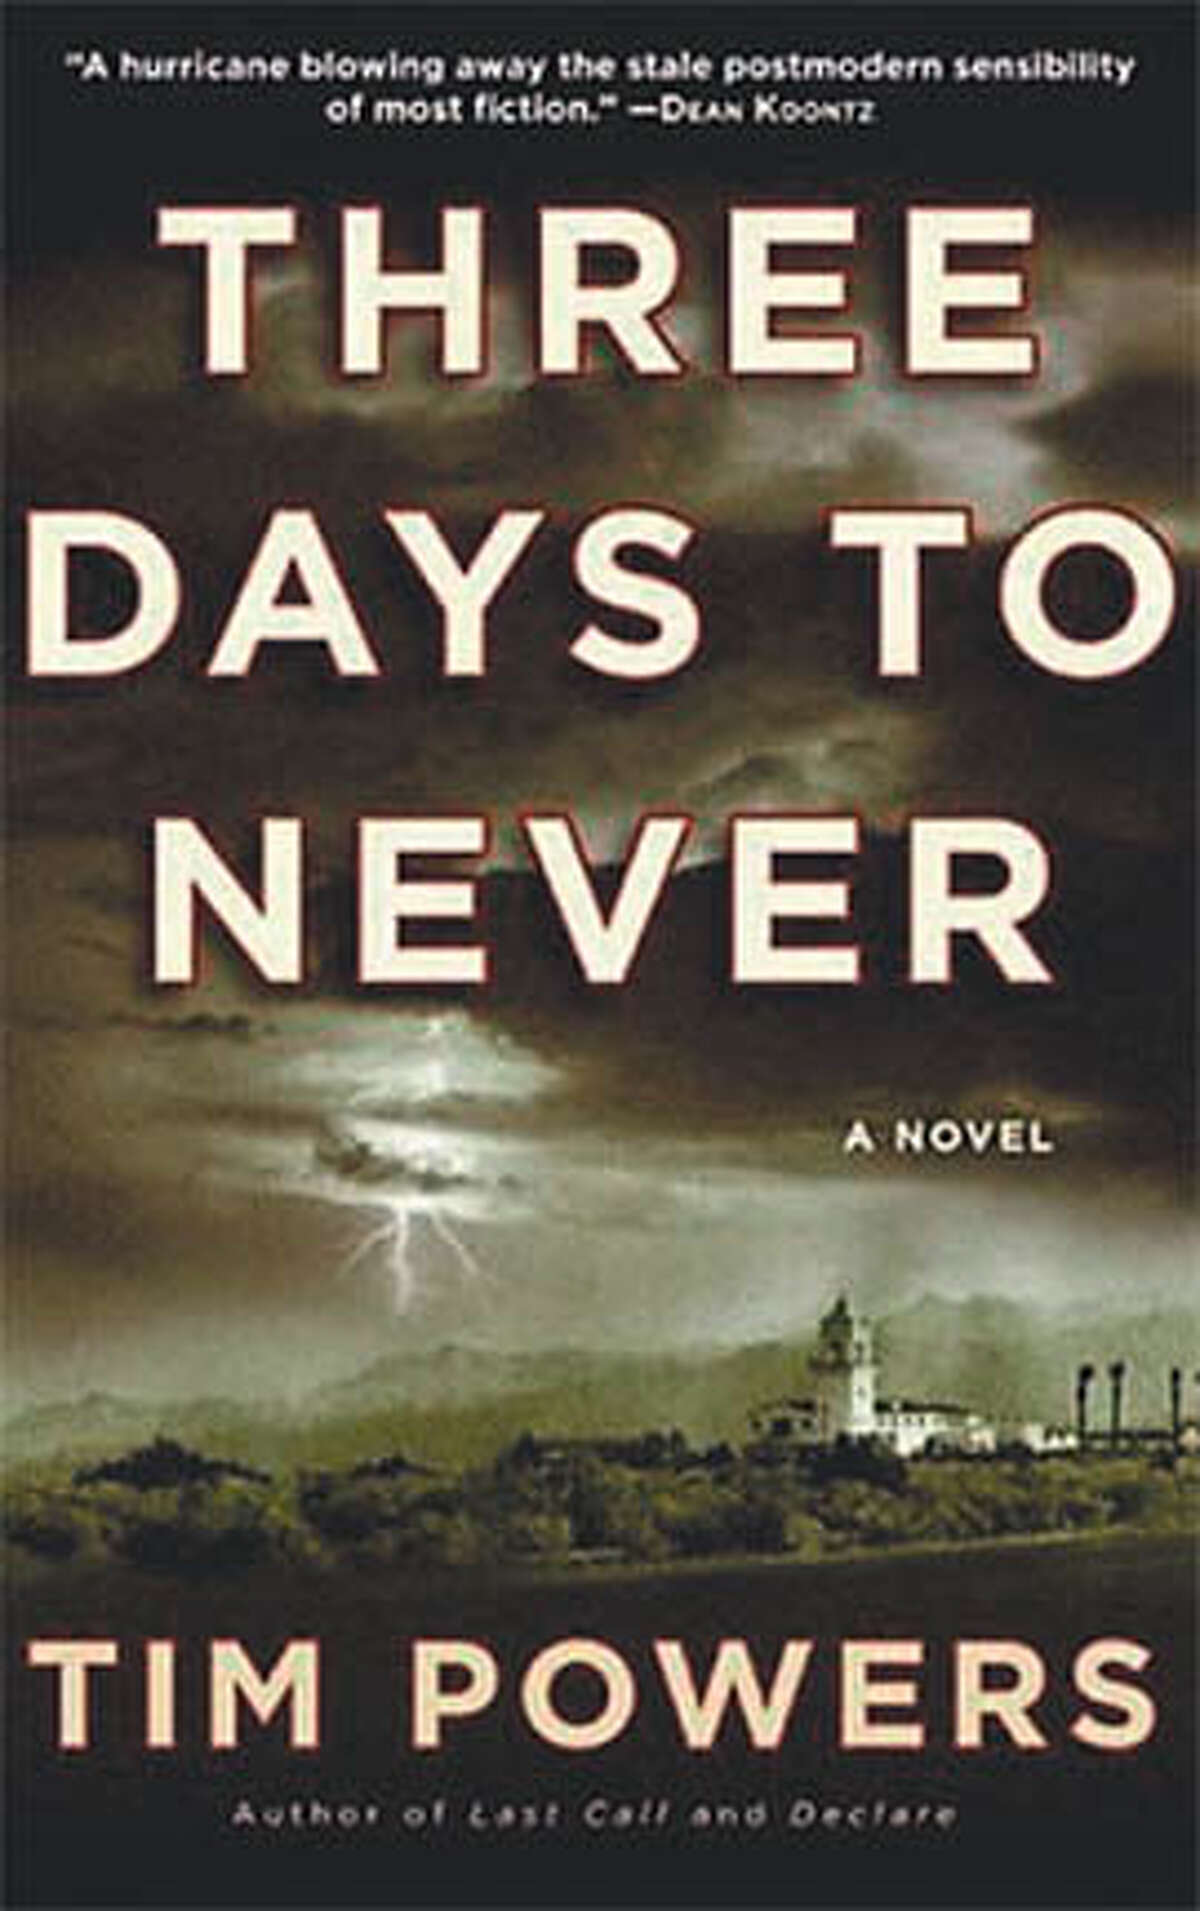 "Three Days to Never" by Tim Powers